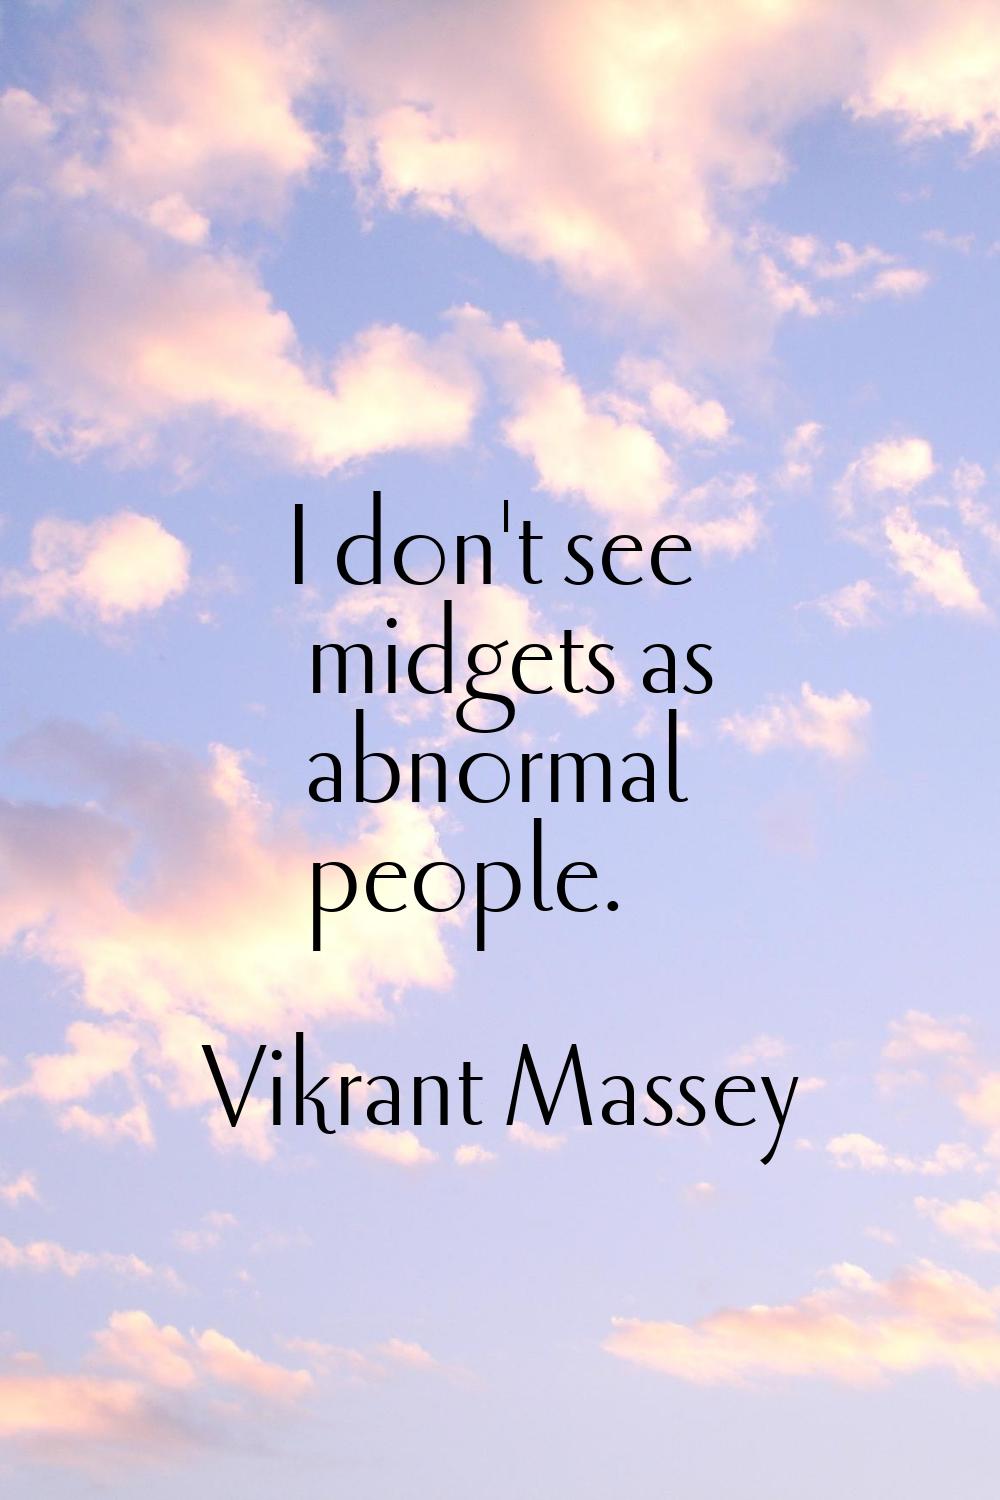 I don't see midgets as abnormal people.